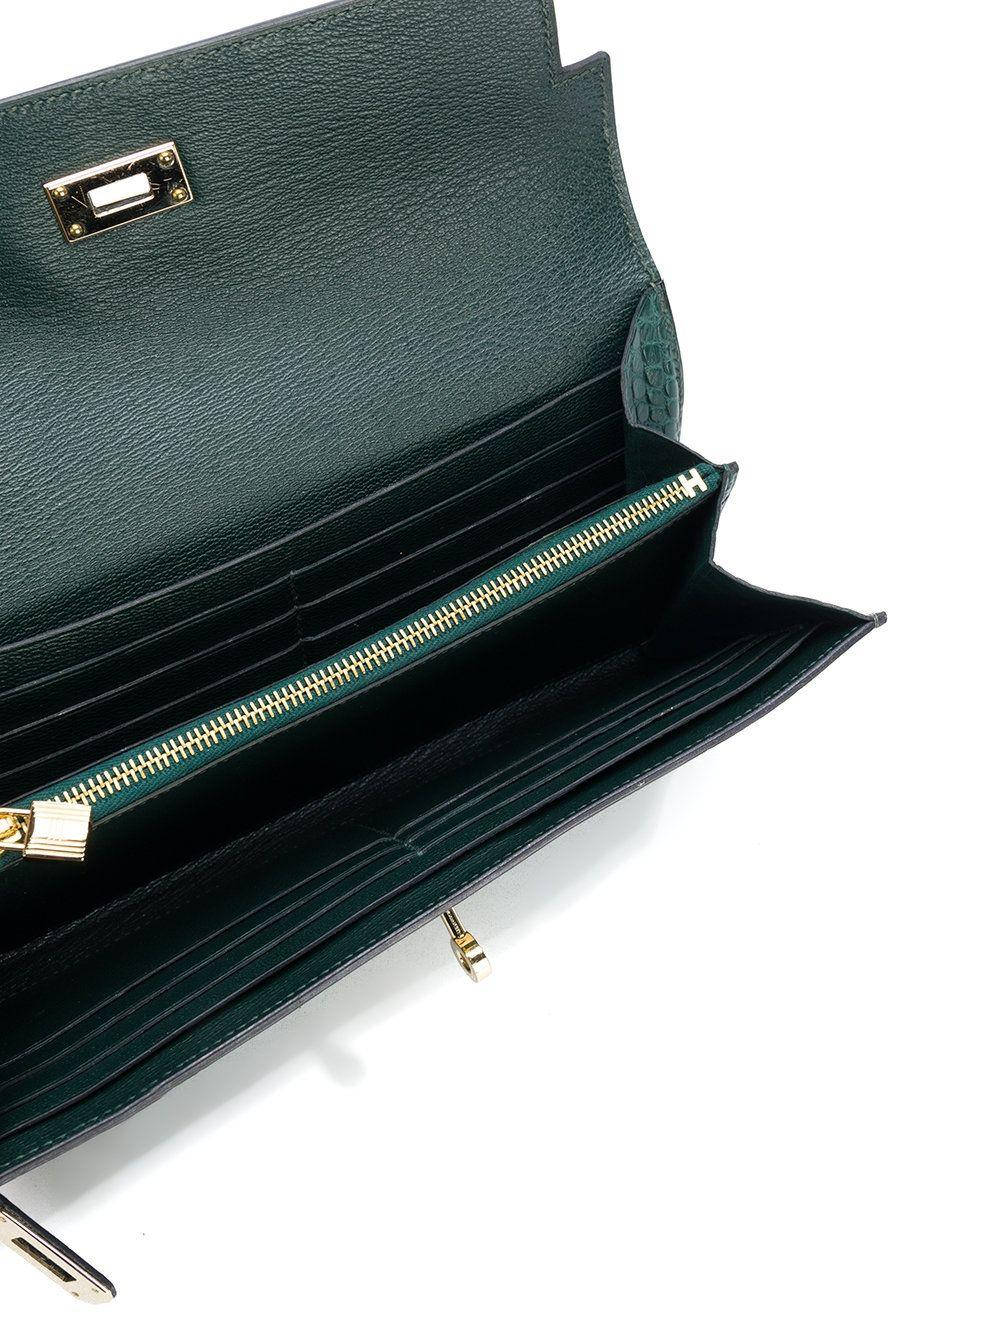 Both stylish and elegant, this malachite green Kelly wallet from Hermès features multiple interior card slots and an internal zipped pocket. Crafted from a precious leather, this luxurious wallet features its iconic turn-lock closure, subtle Hermes